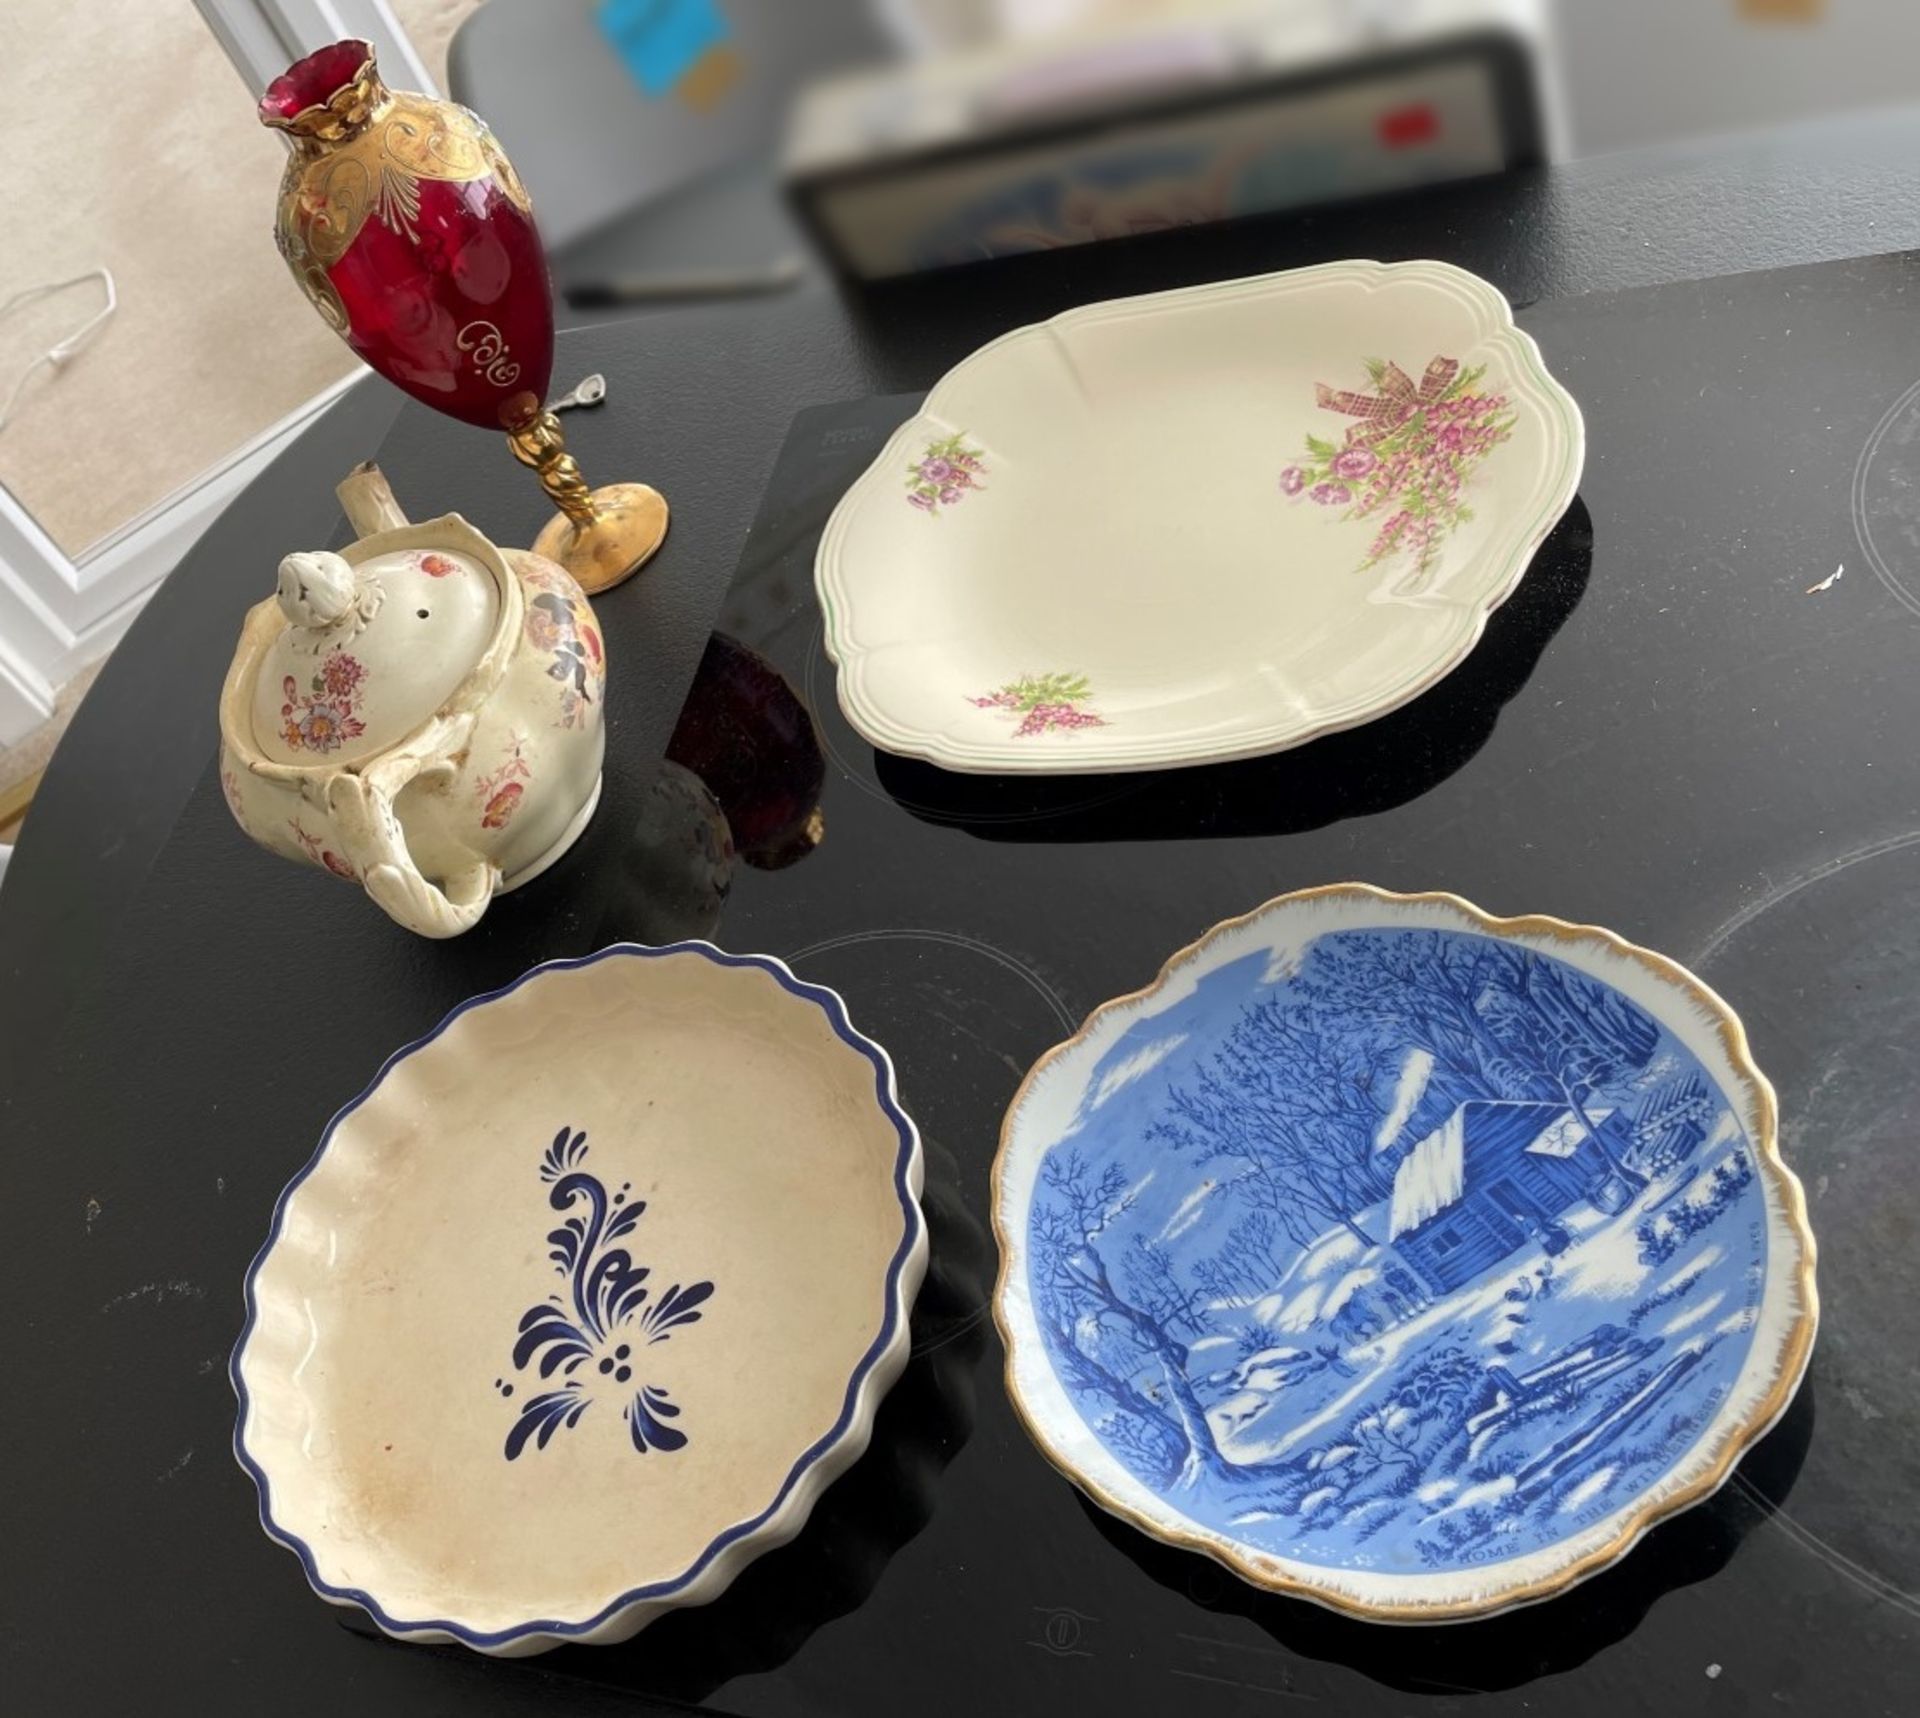 5 x Assorted Items Of Antique / Vintage Tableware  - From An Exclusive Property In Leeds - No VAT on